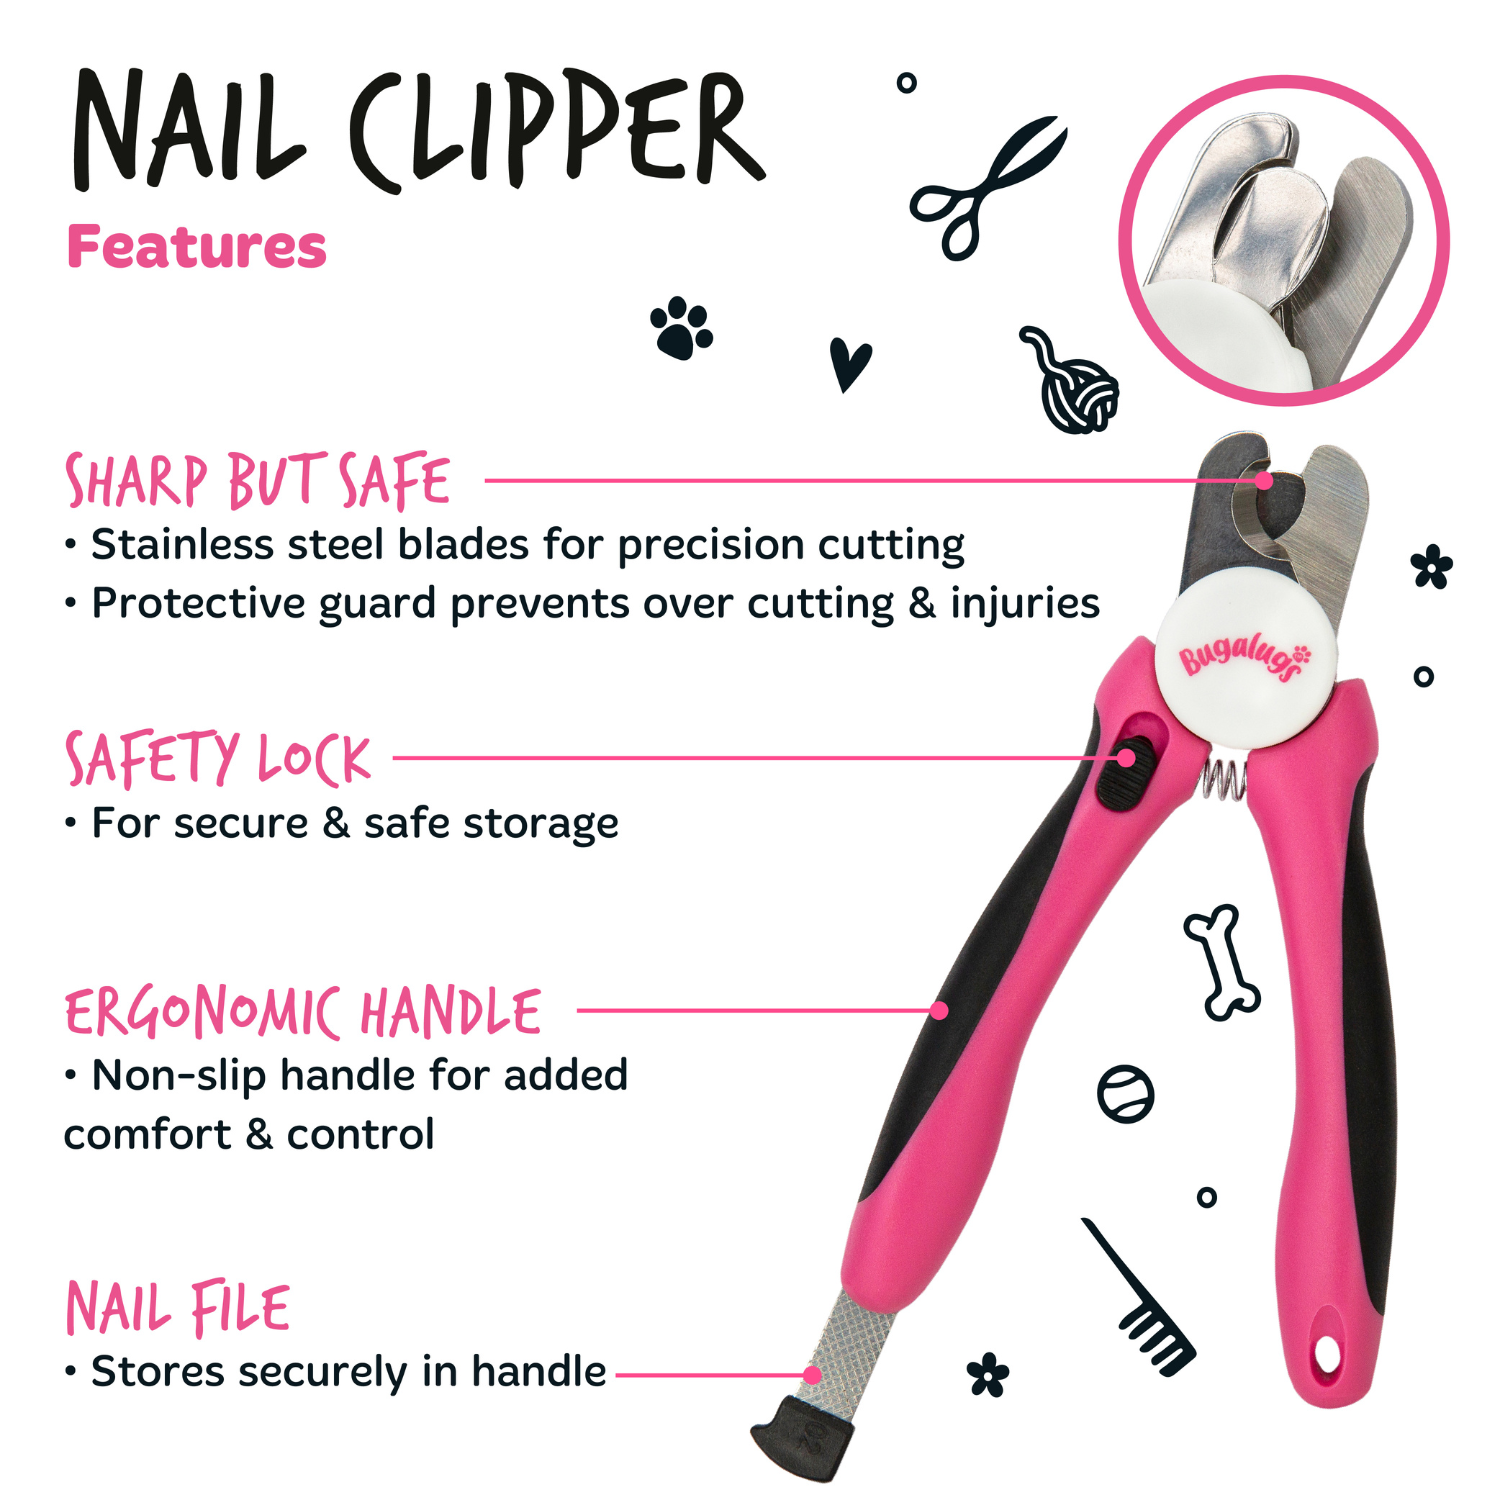 Bugalugs Small to Medium Nail Clippers - Key features